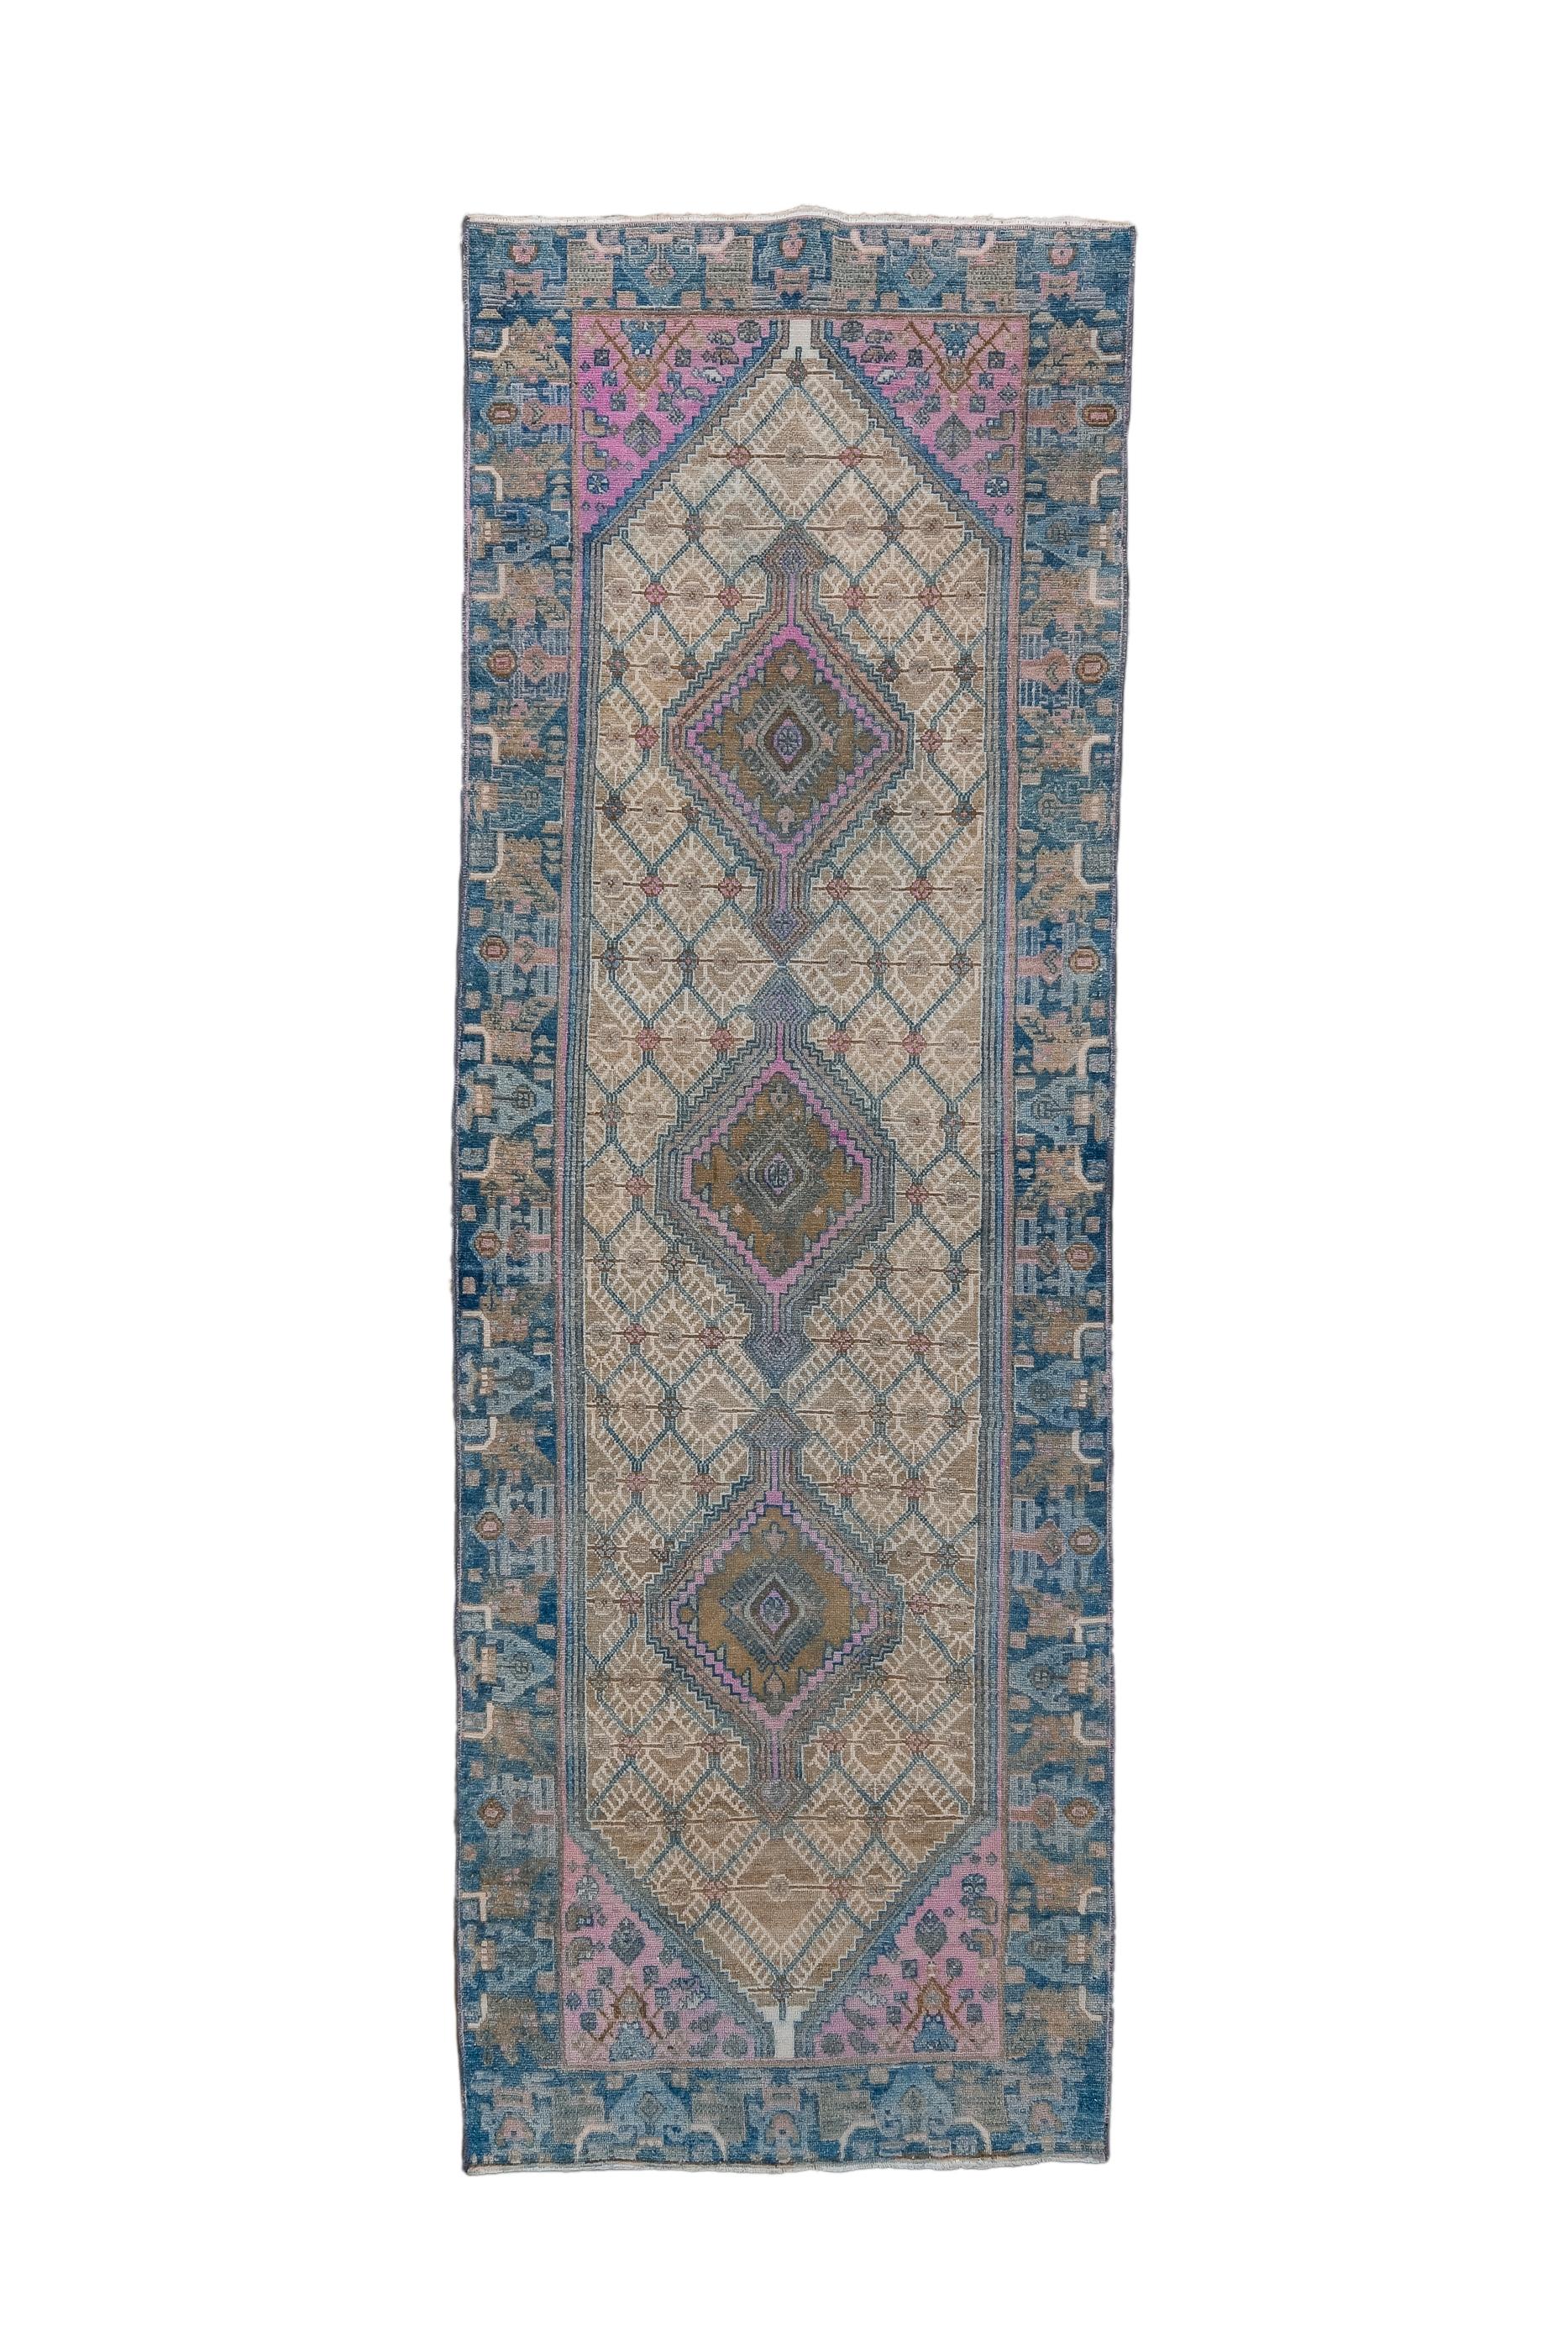 This colourful kellegi (long rug) shows an end-pointed subfield densely packed with uniform fringed diamonds, and supporting a tripartite run of nested and serrated diamonds. Sky blue field narrow along sides and widens to  flower-filled triangles